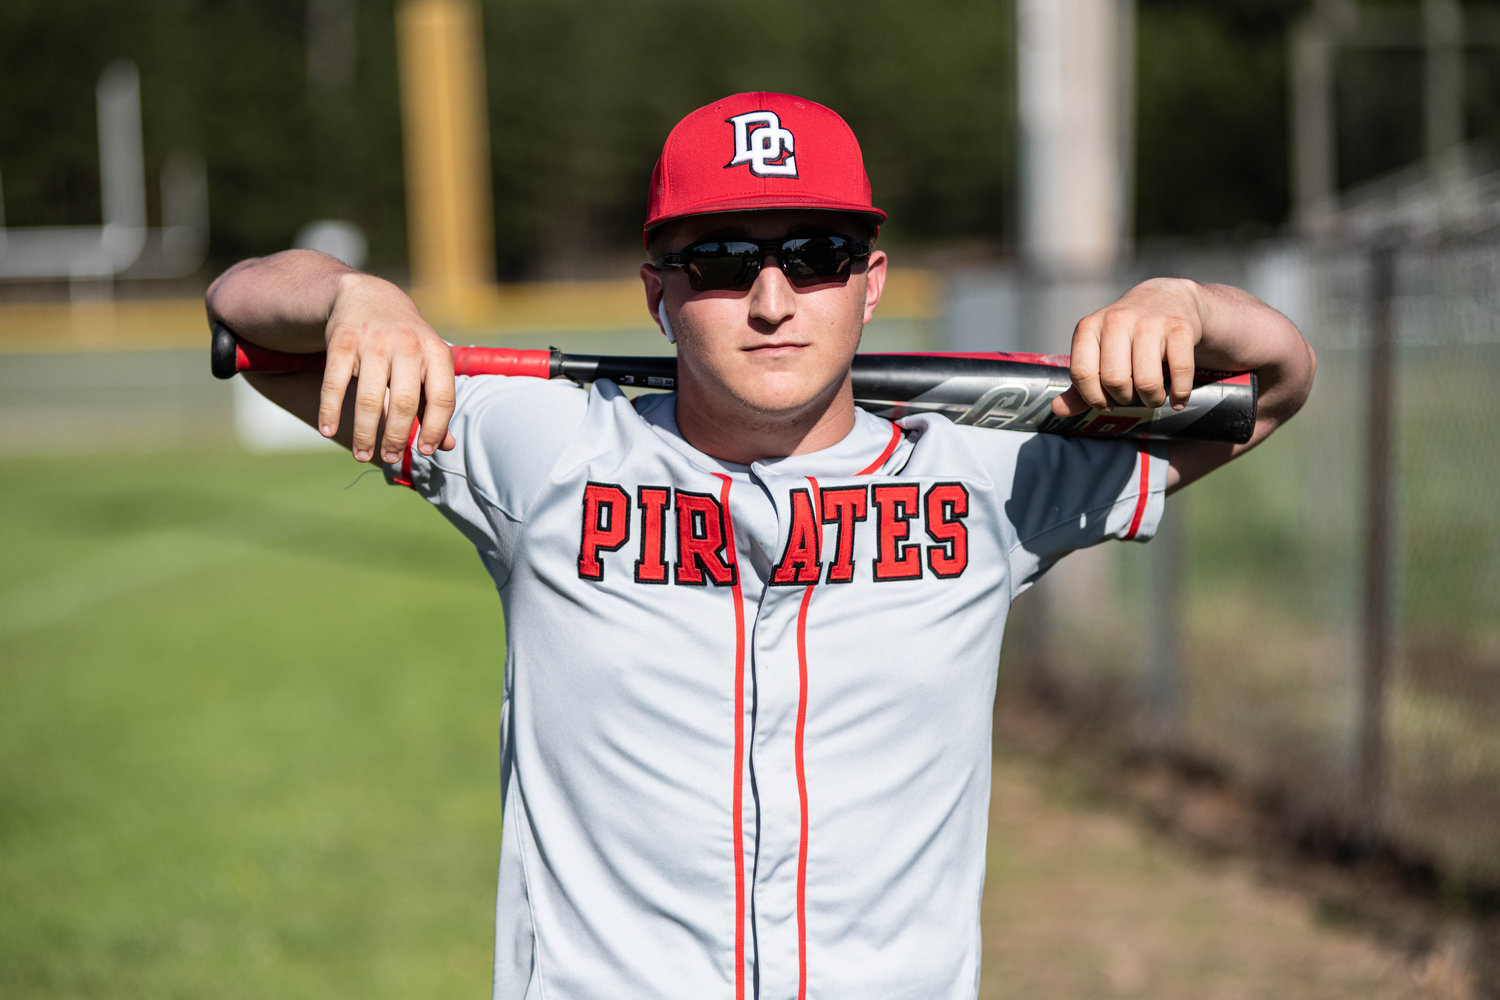 GAVIN WEAR (pictured) and TUCKER STANDLEY were named as the Pirate Pride award recipients by head baseball coach Aaron Goad. Standley and Wear were members of the Pirate Baseball and Football programs this season.